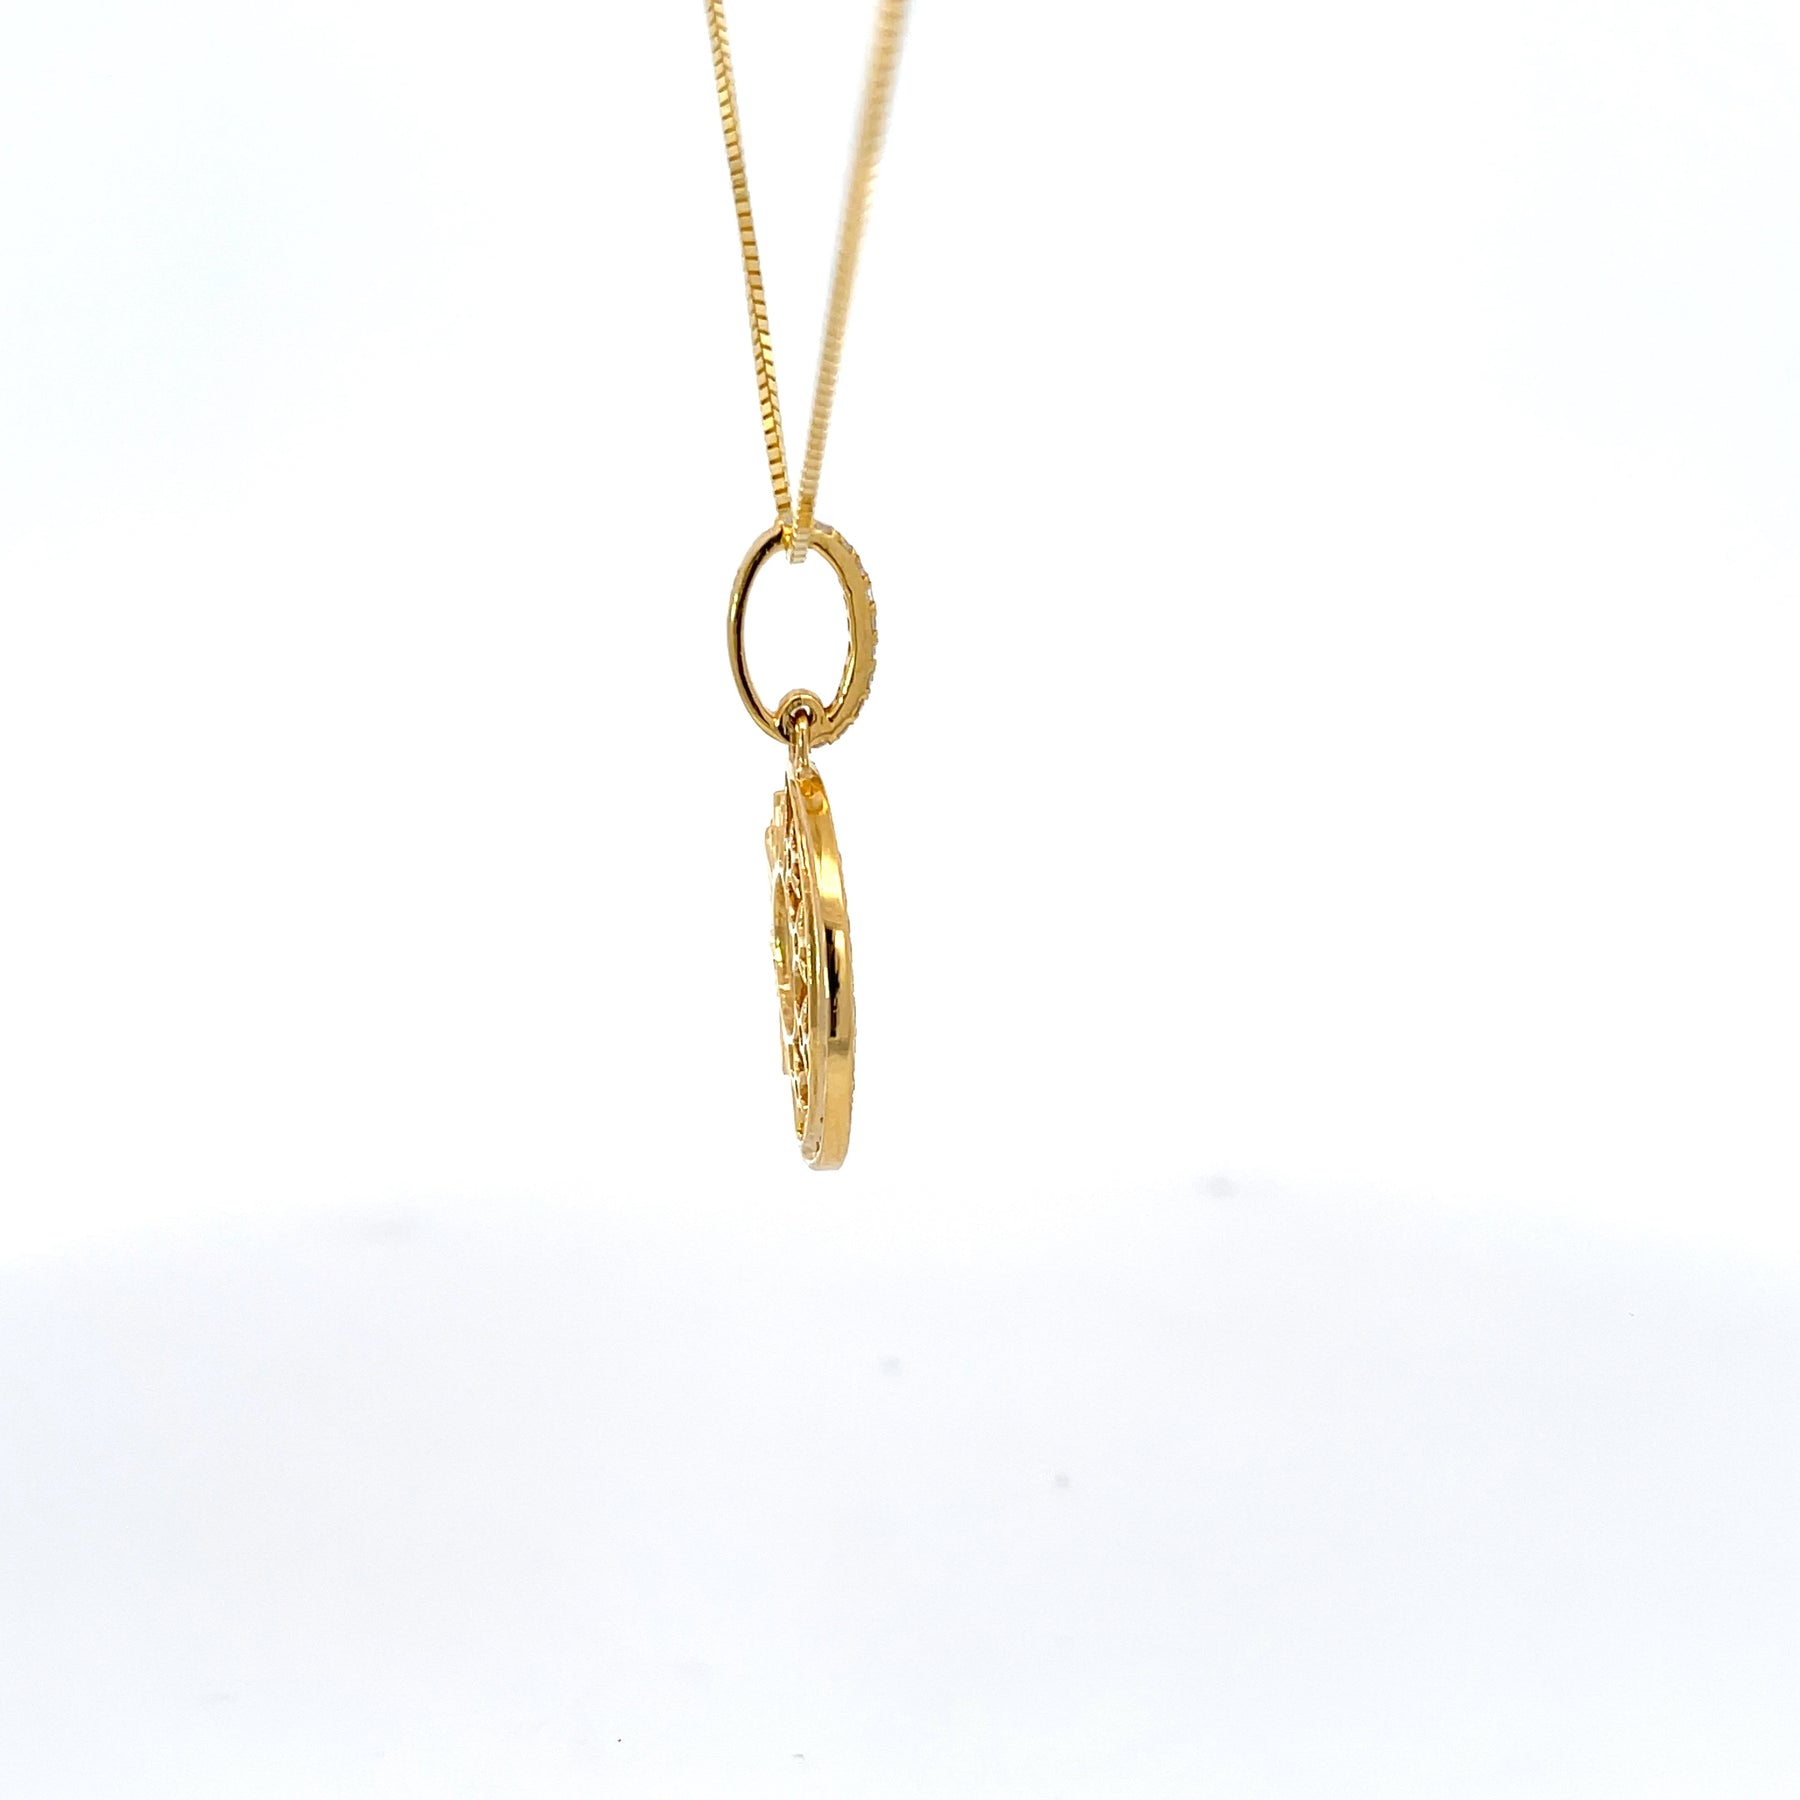 Pragnell 18kt yellow gold Eclipse spring necklace